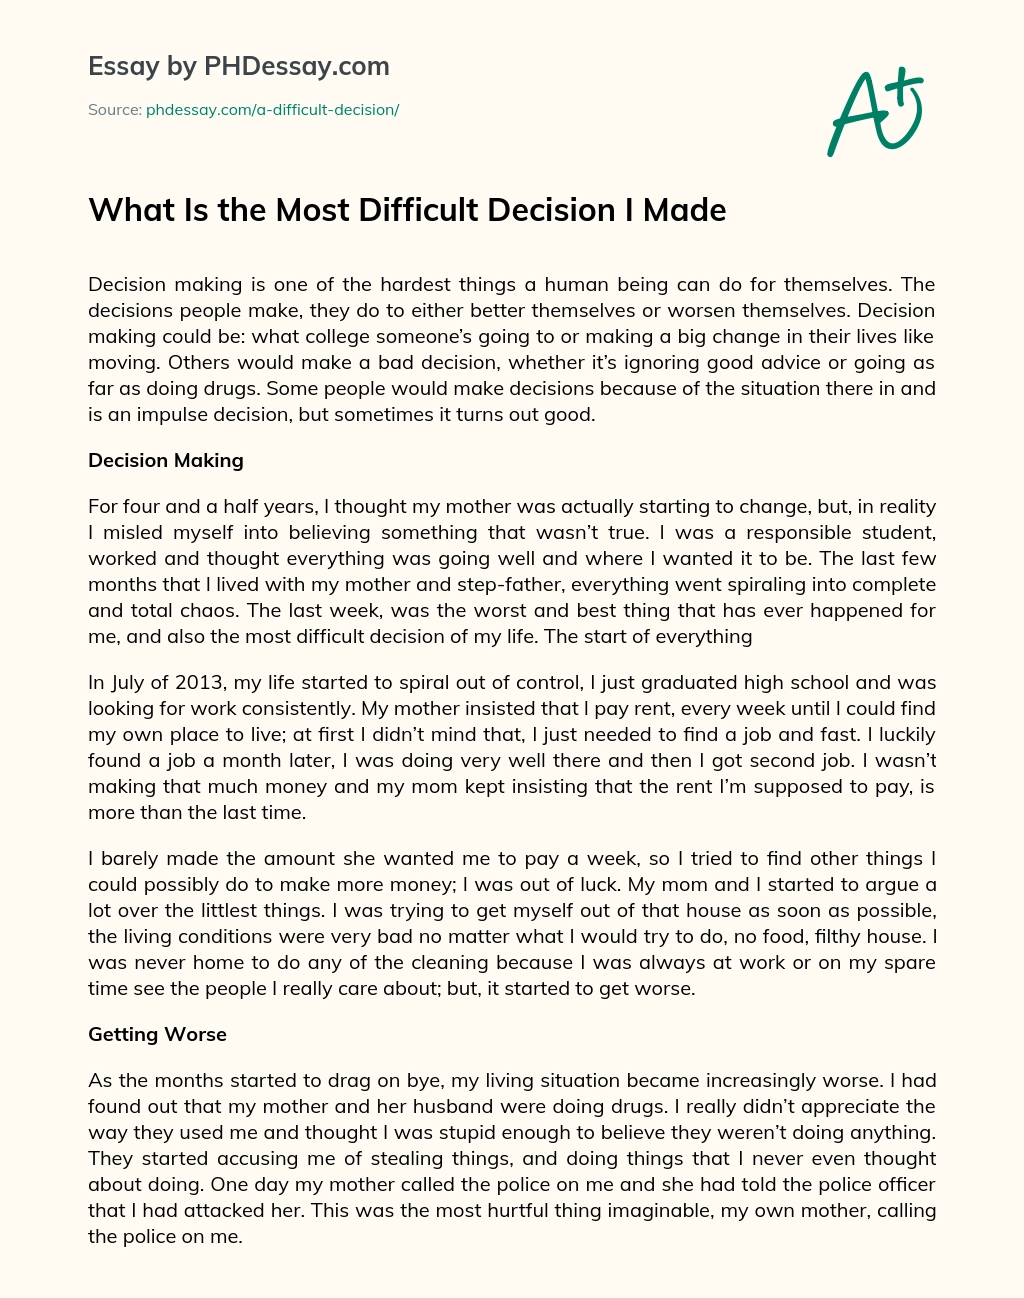 What Is the Most Difficult Decision I Made essay